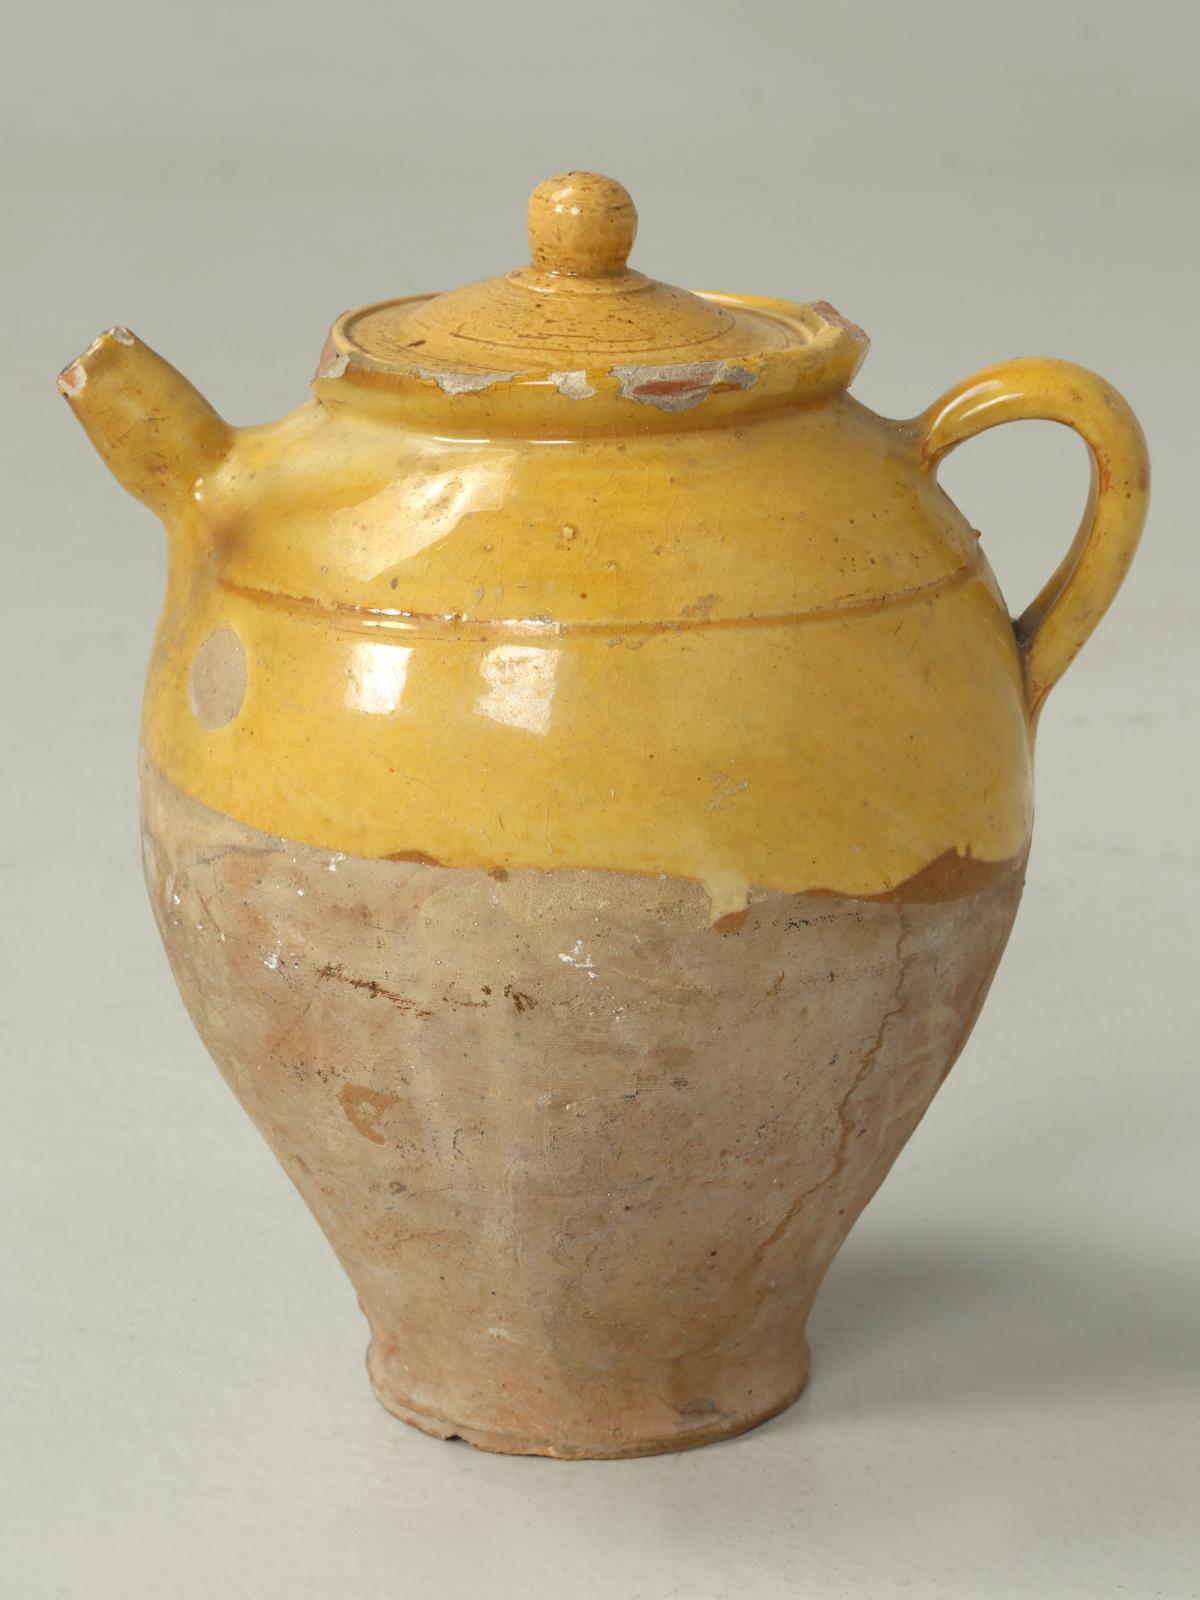 French ochre glaze pot à eau, or cruche with lid. Great for decorating a country French kitchen, with that classic ochre color, that somehow just goes with everything.